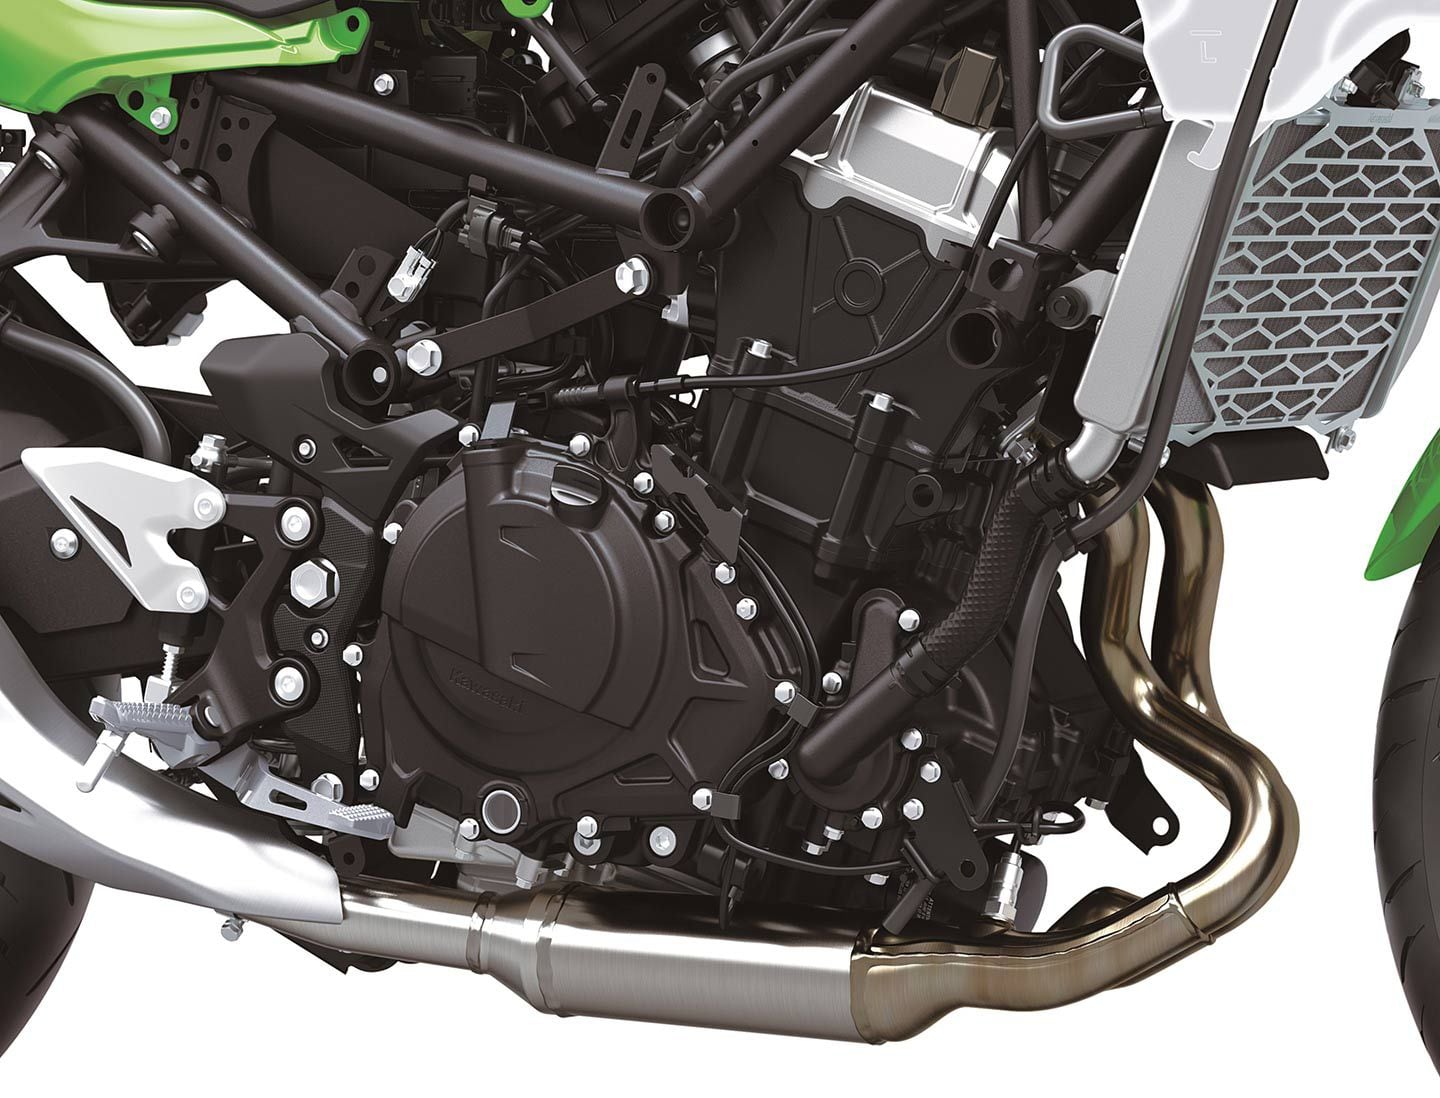 The Ninja 500 gets a capacity increase to the tune of 52cc. Kawasaki claims the 451cc engine produces 31.7 lb.-ft. of torque at 7,500 rpm.